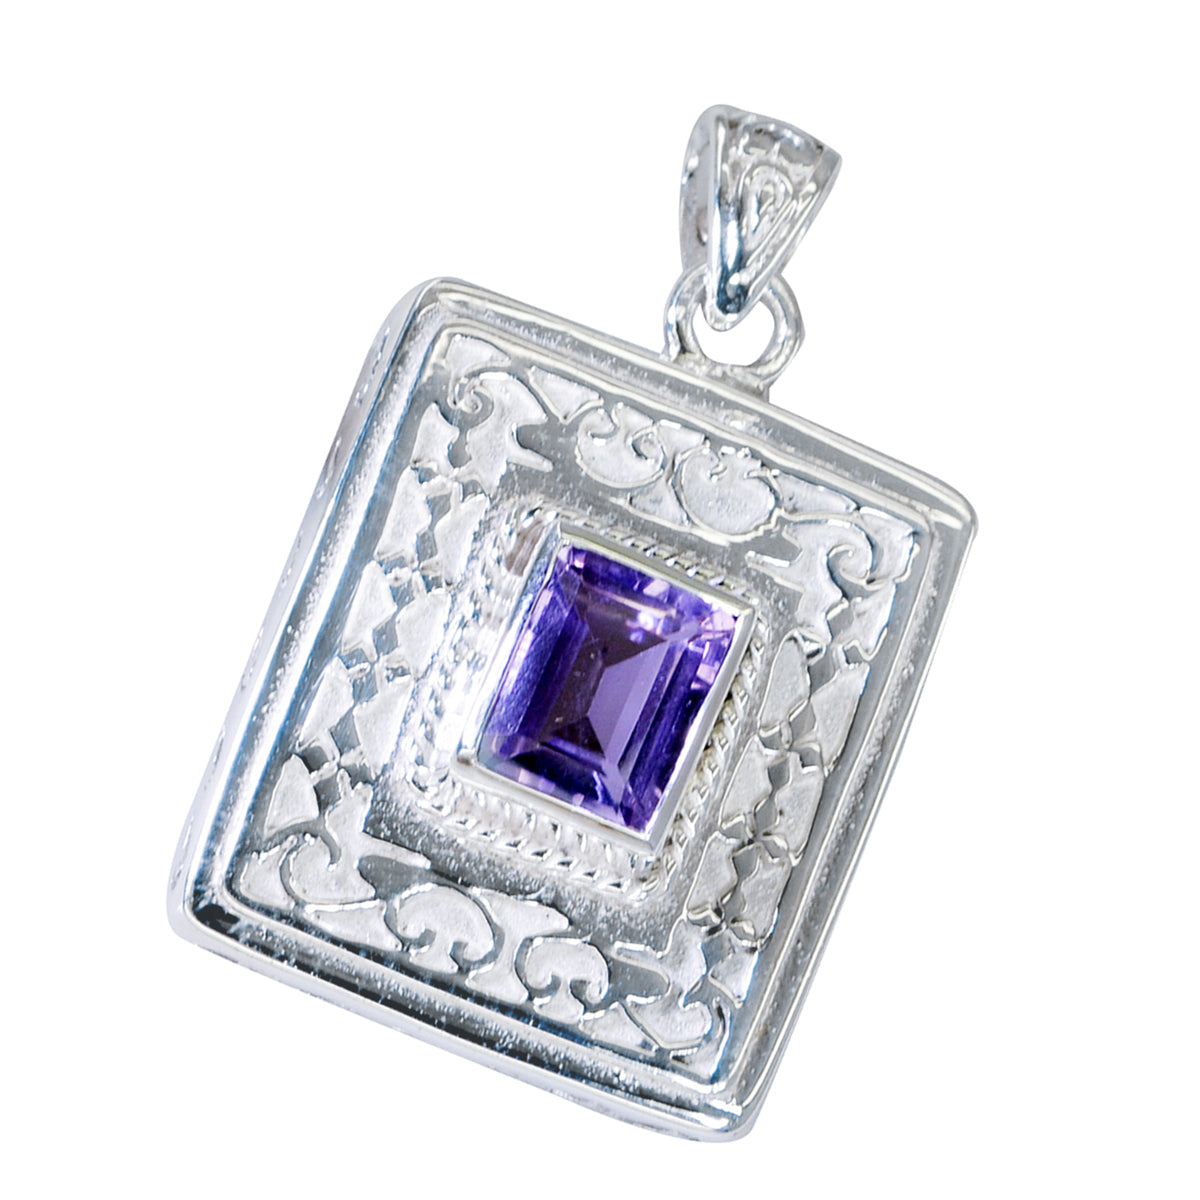 Riyo Beauteous Gemstone Octagon Faceted Purple Amethyst Sterling Silver Pendant Gift For Women